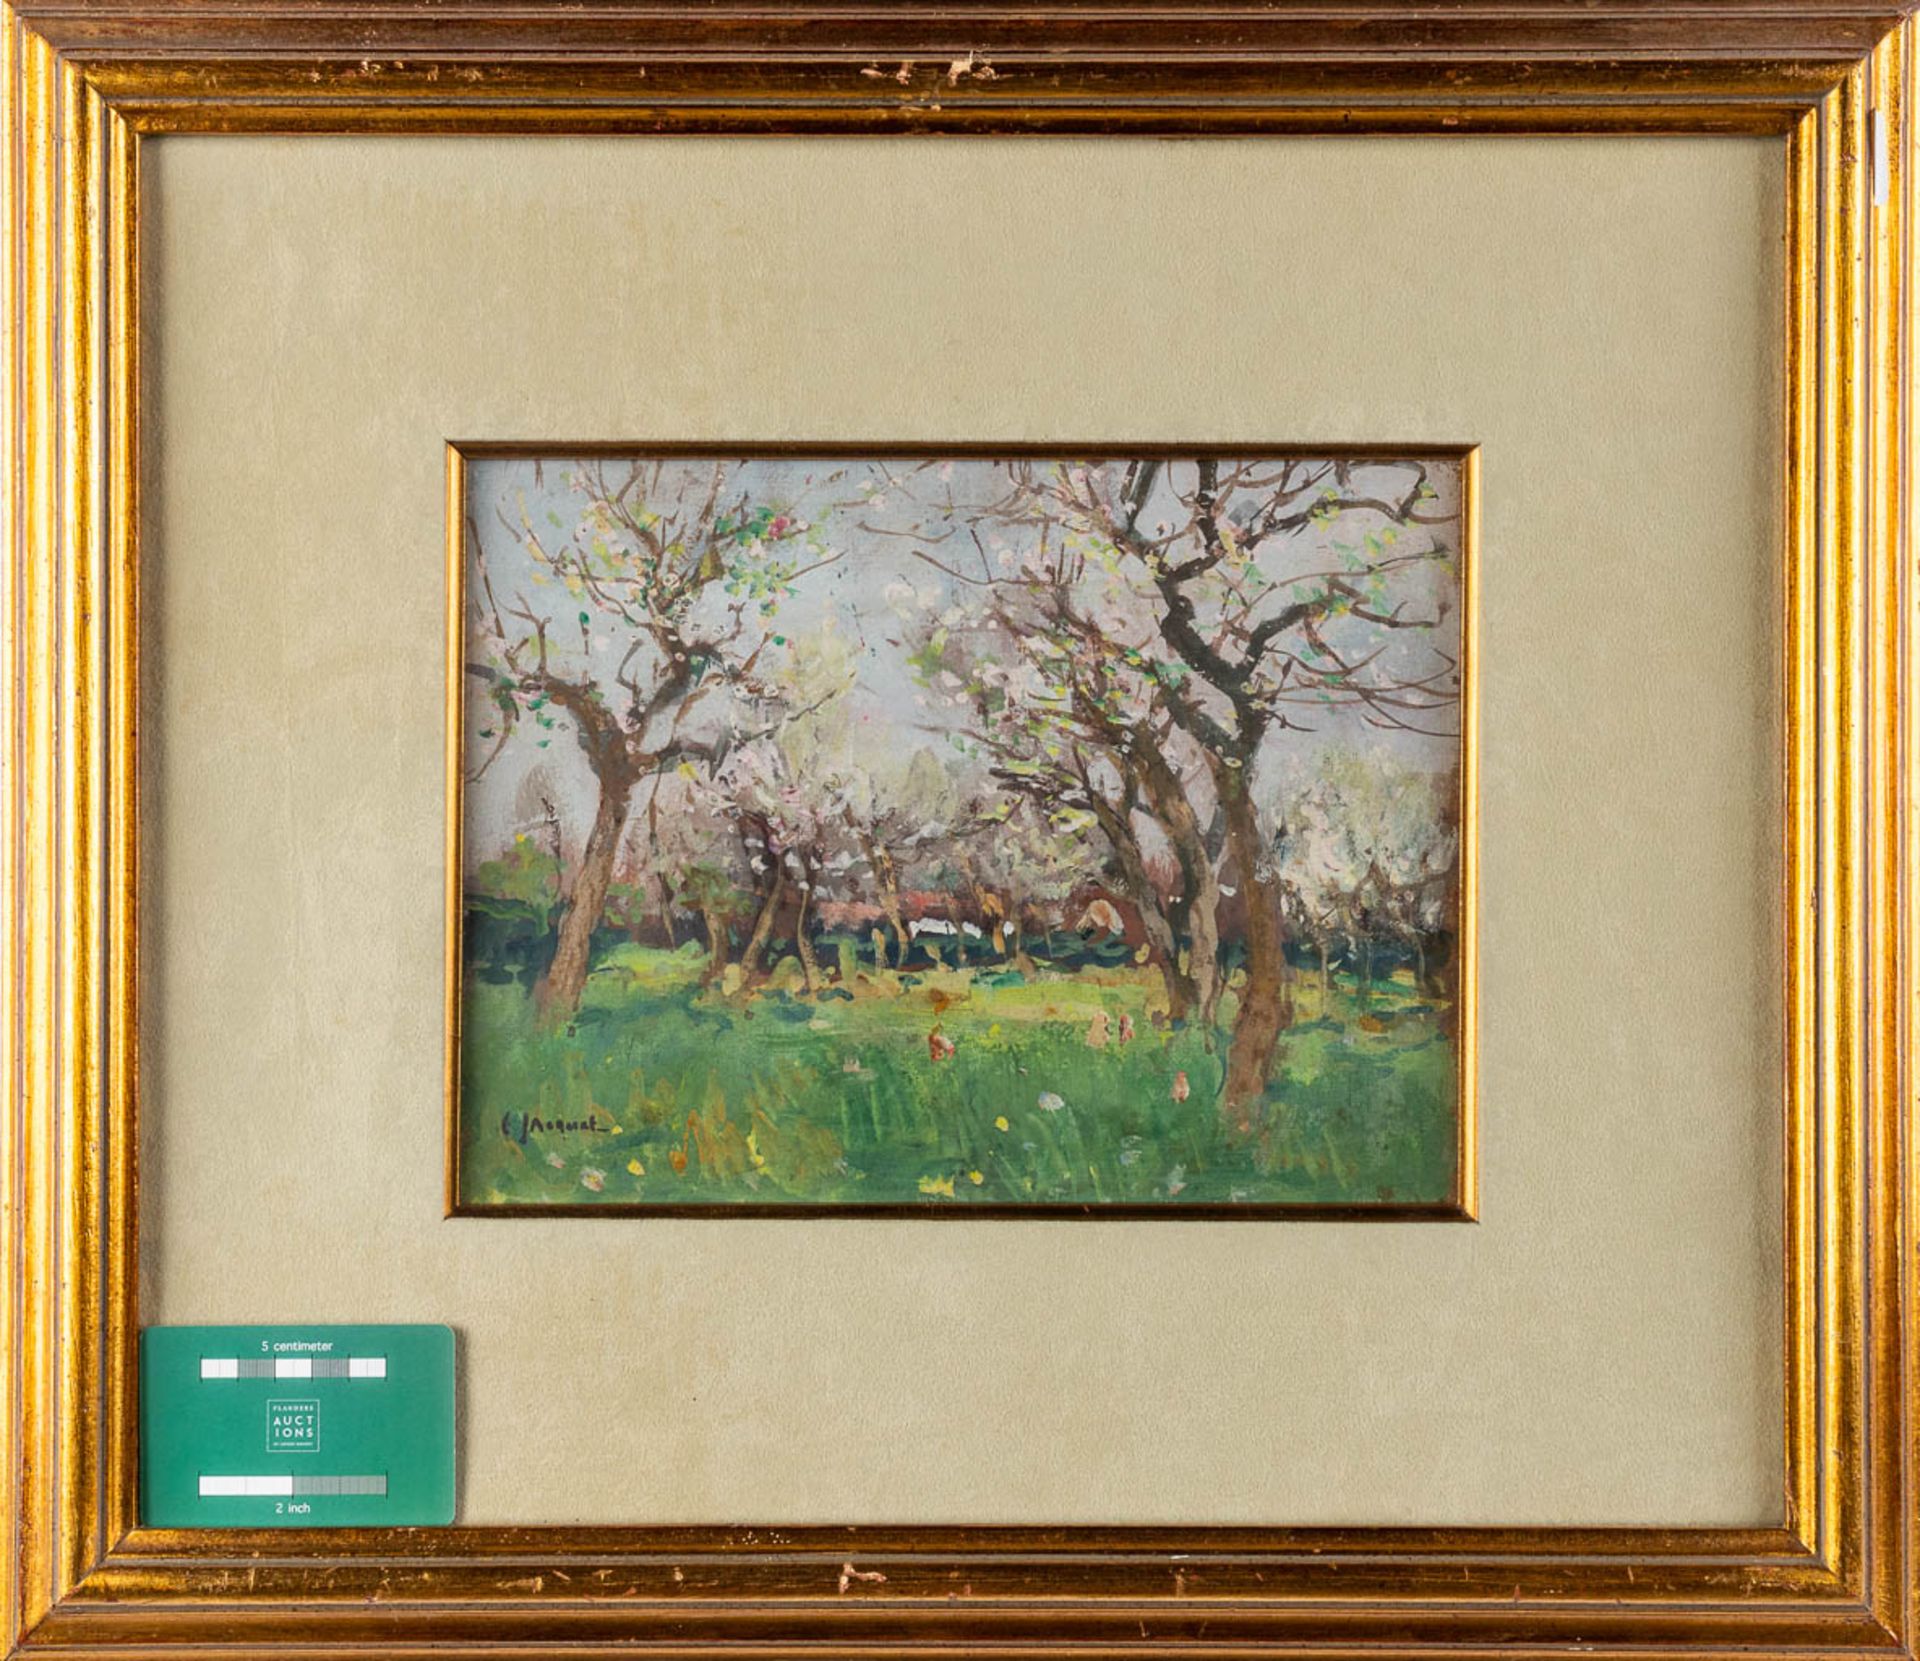 Charles JACQUET (1841-1921) 'The Orchard' oil on paper. (W:27 x H:20 cm) - Image 2 of 5